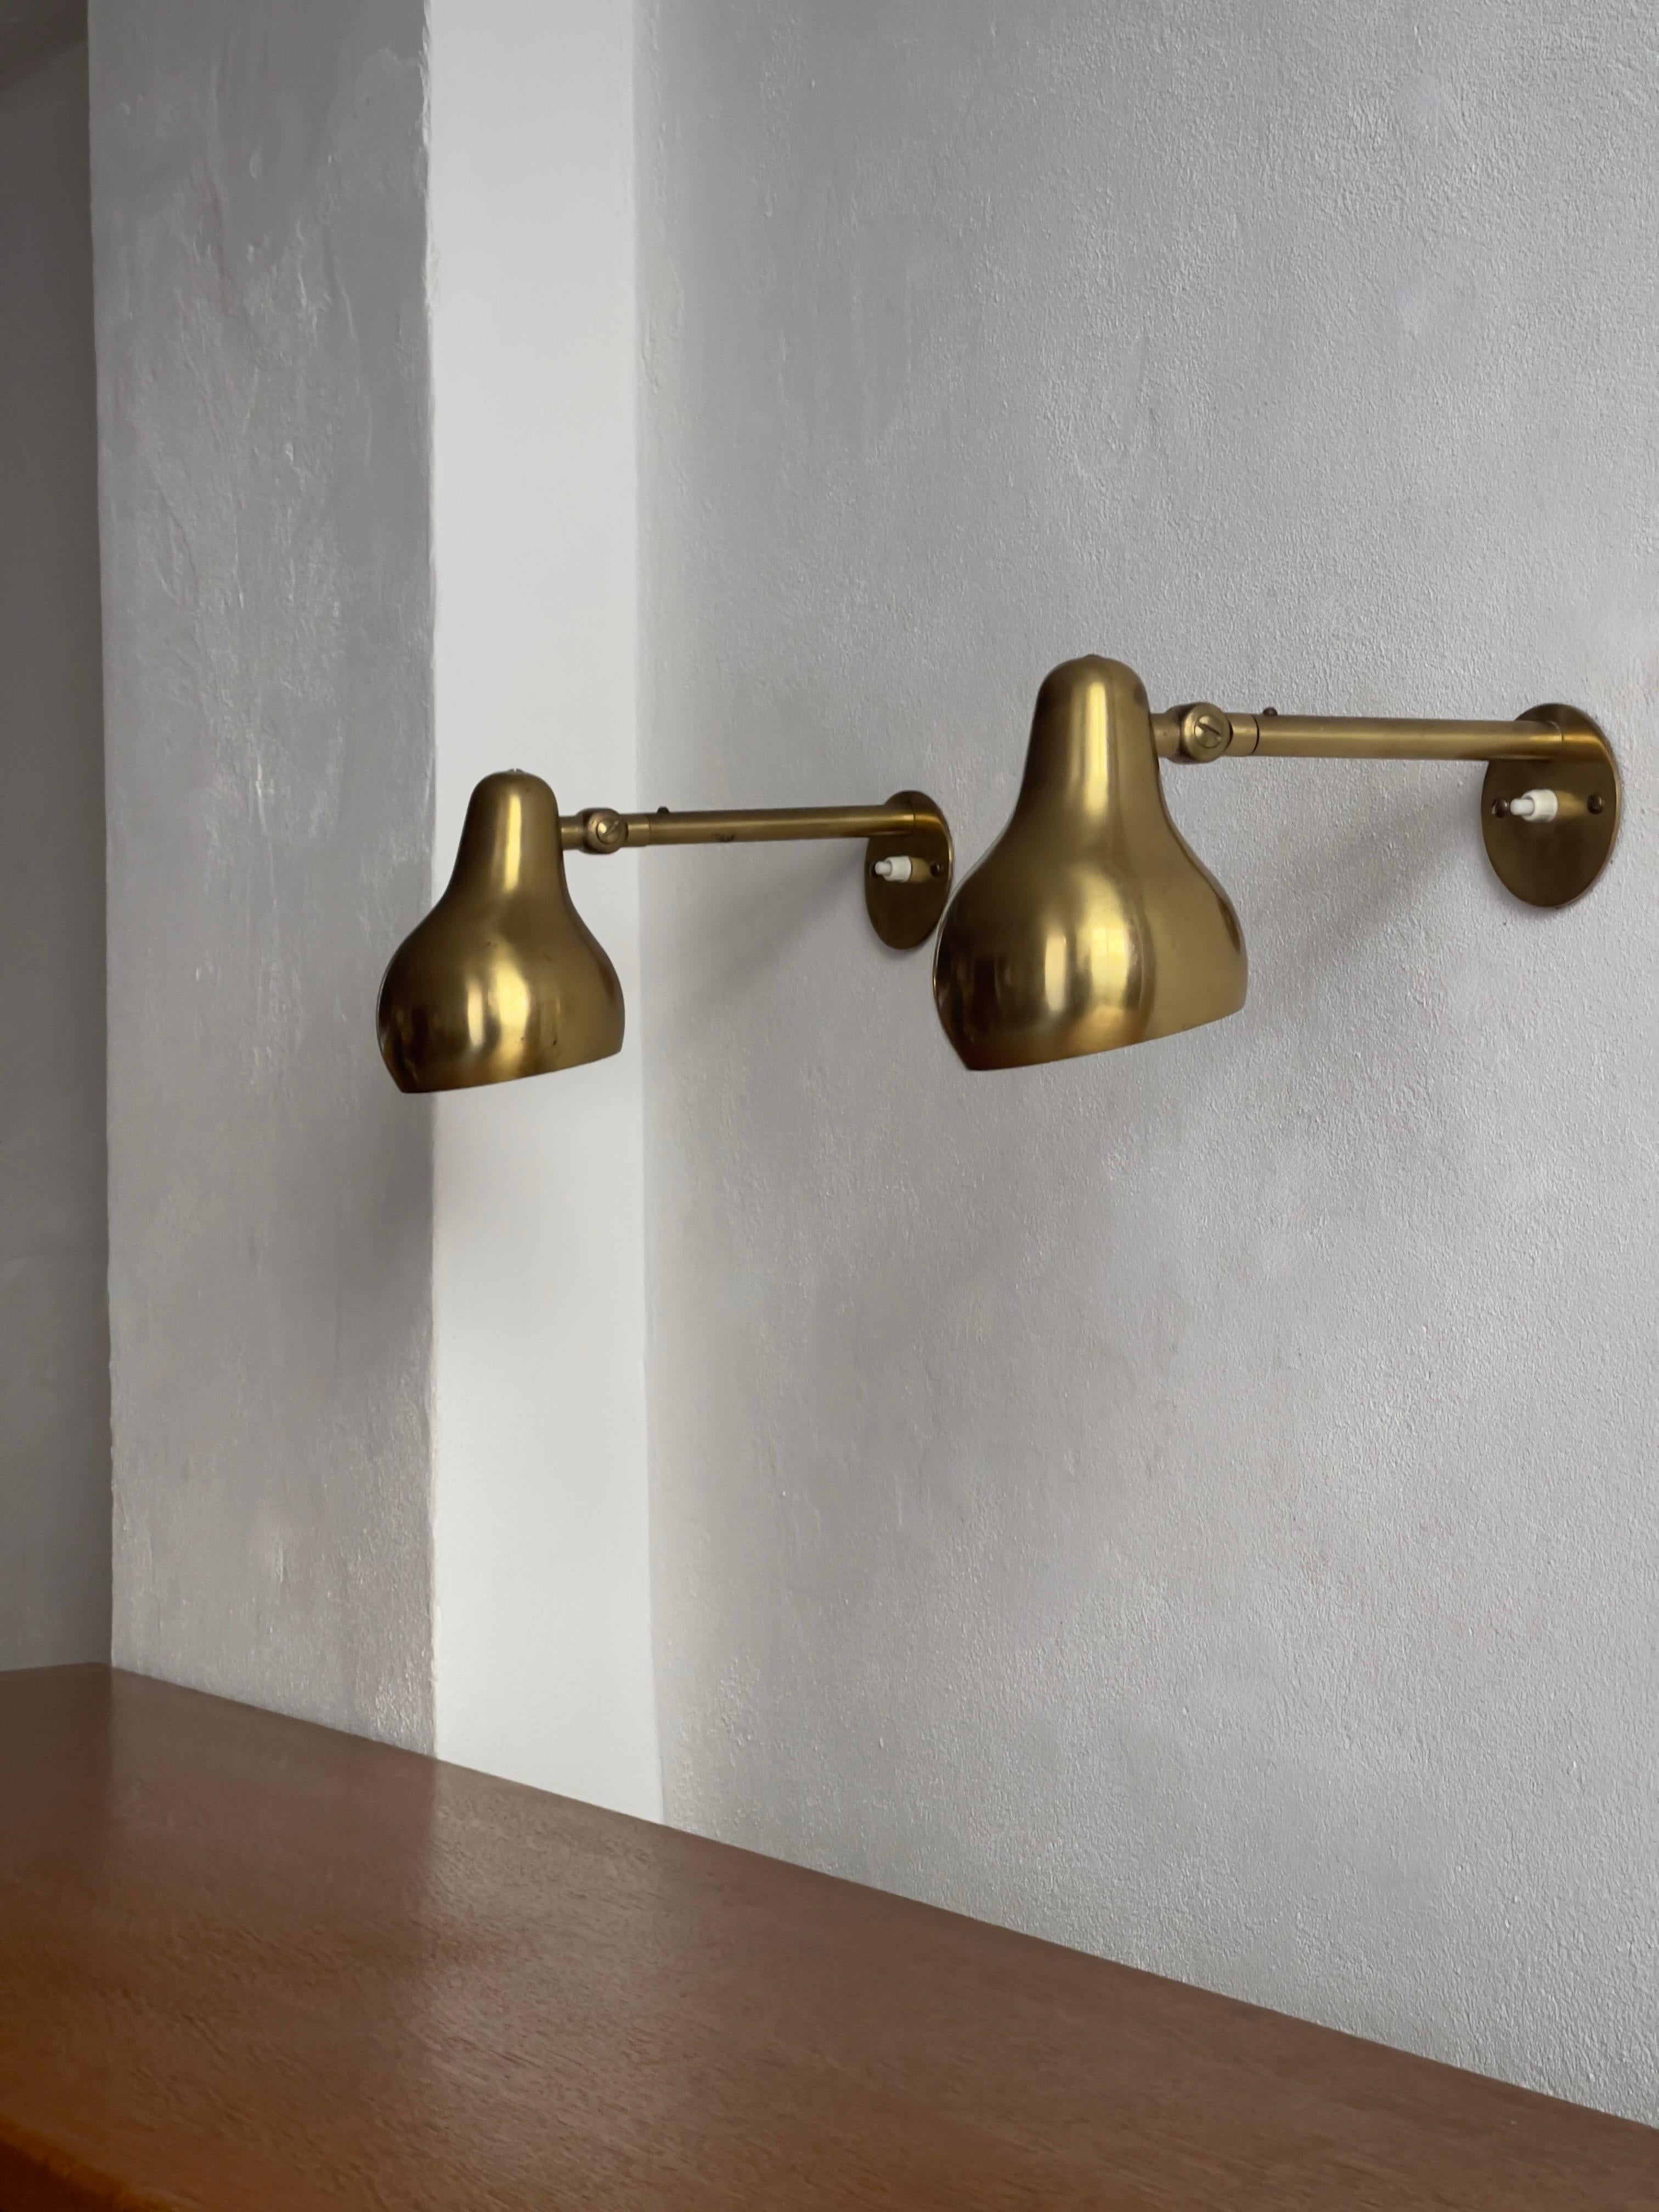 We have the privilege of showcasing a rare, original pair of 1940s Wilhelm Lauritzen wall lights crafted in patinated brass and manufactured by the renowned Danish lighting company, Louis Poulsen Denmark 1940s.

Designed for both form and function,